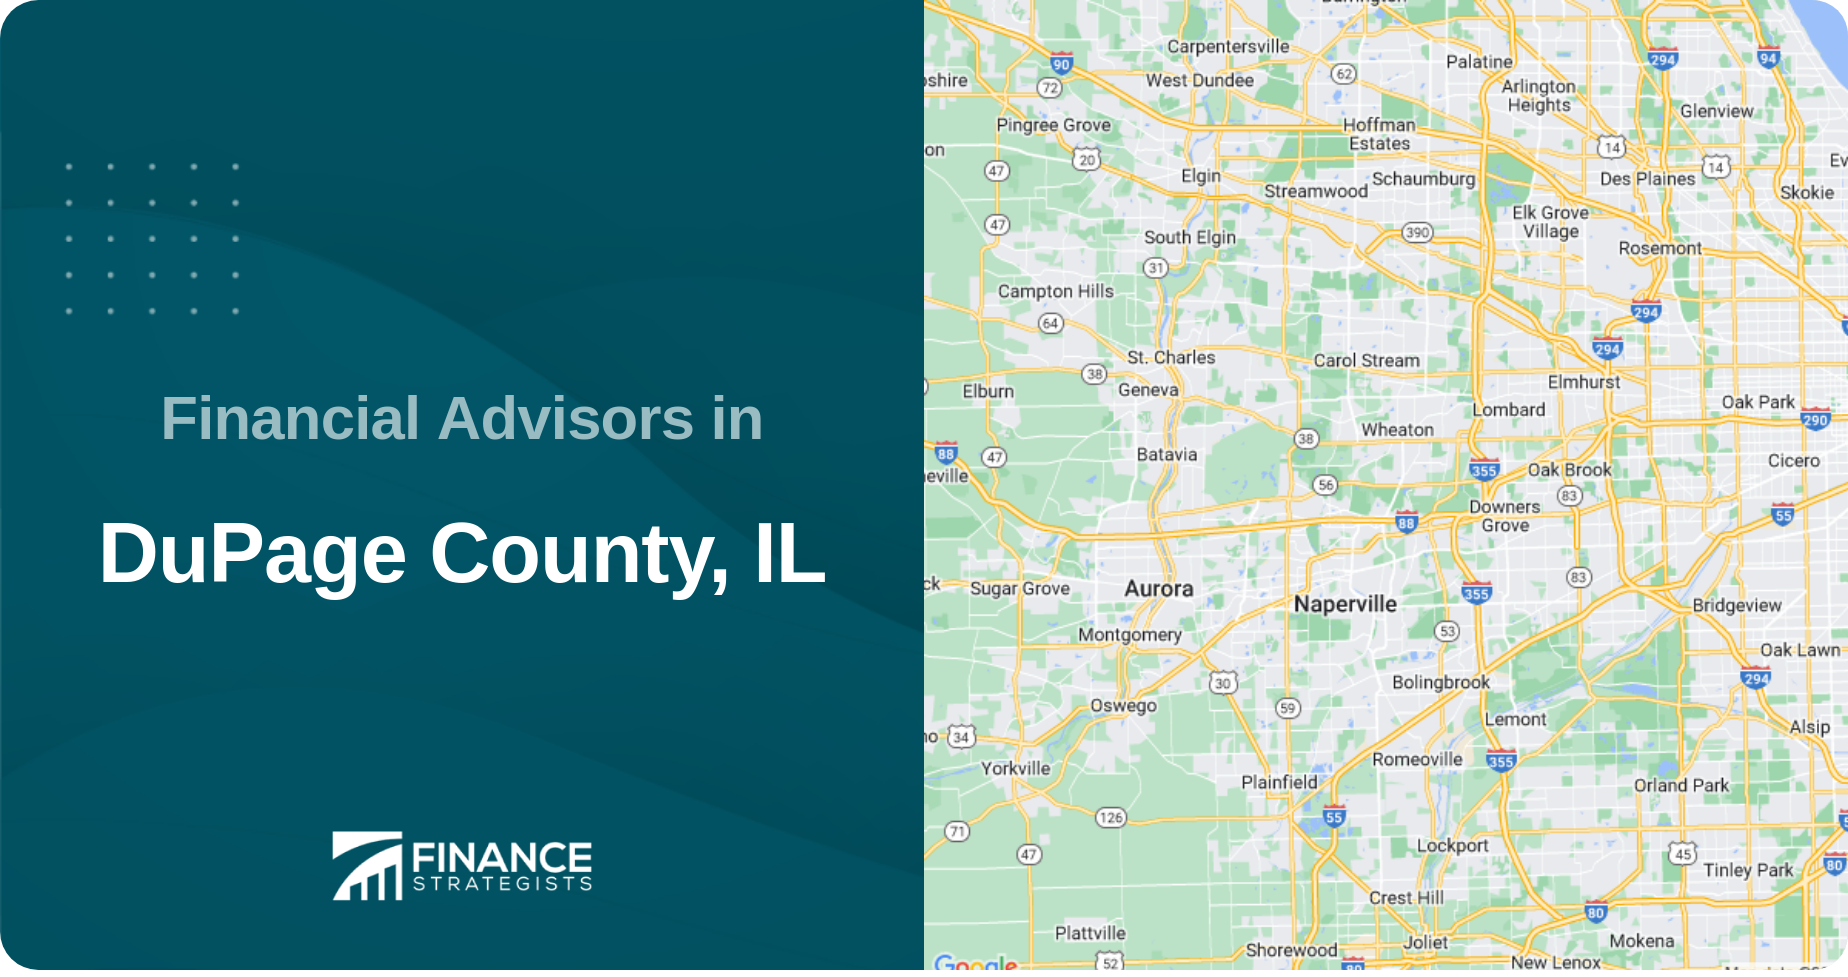 Financial Advisors in DuPage County, IL